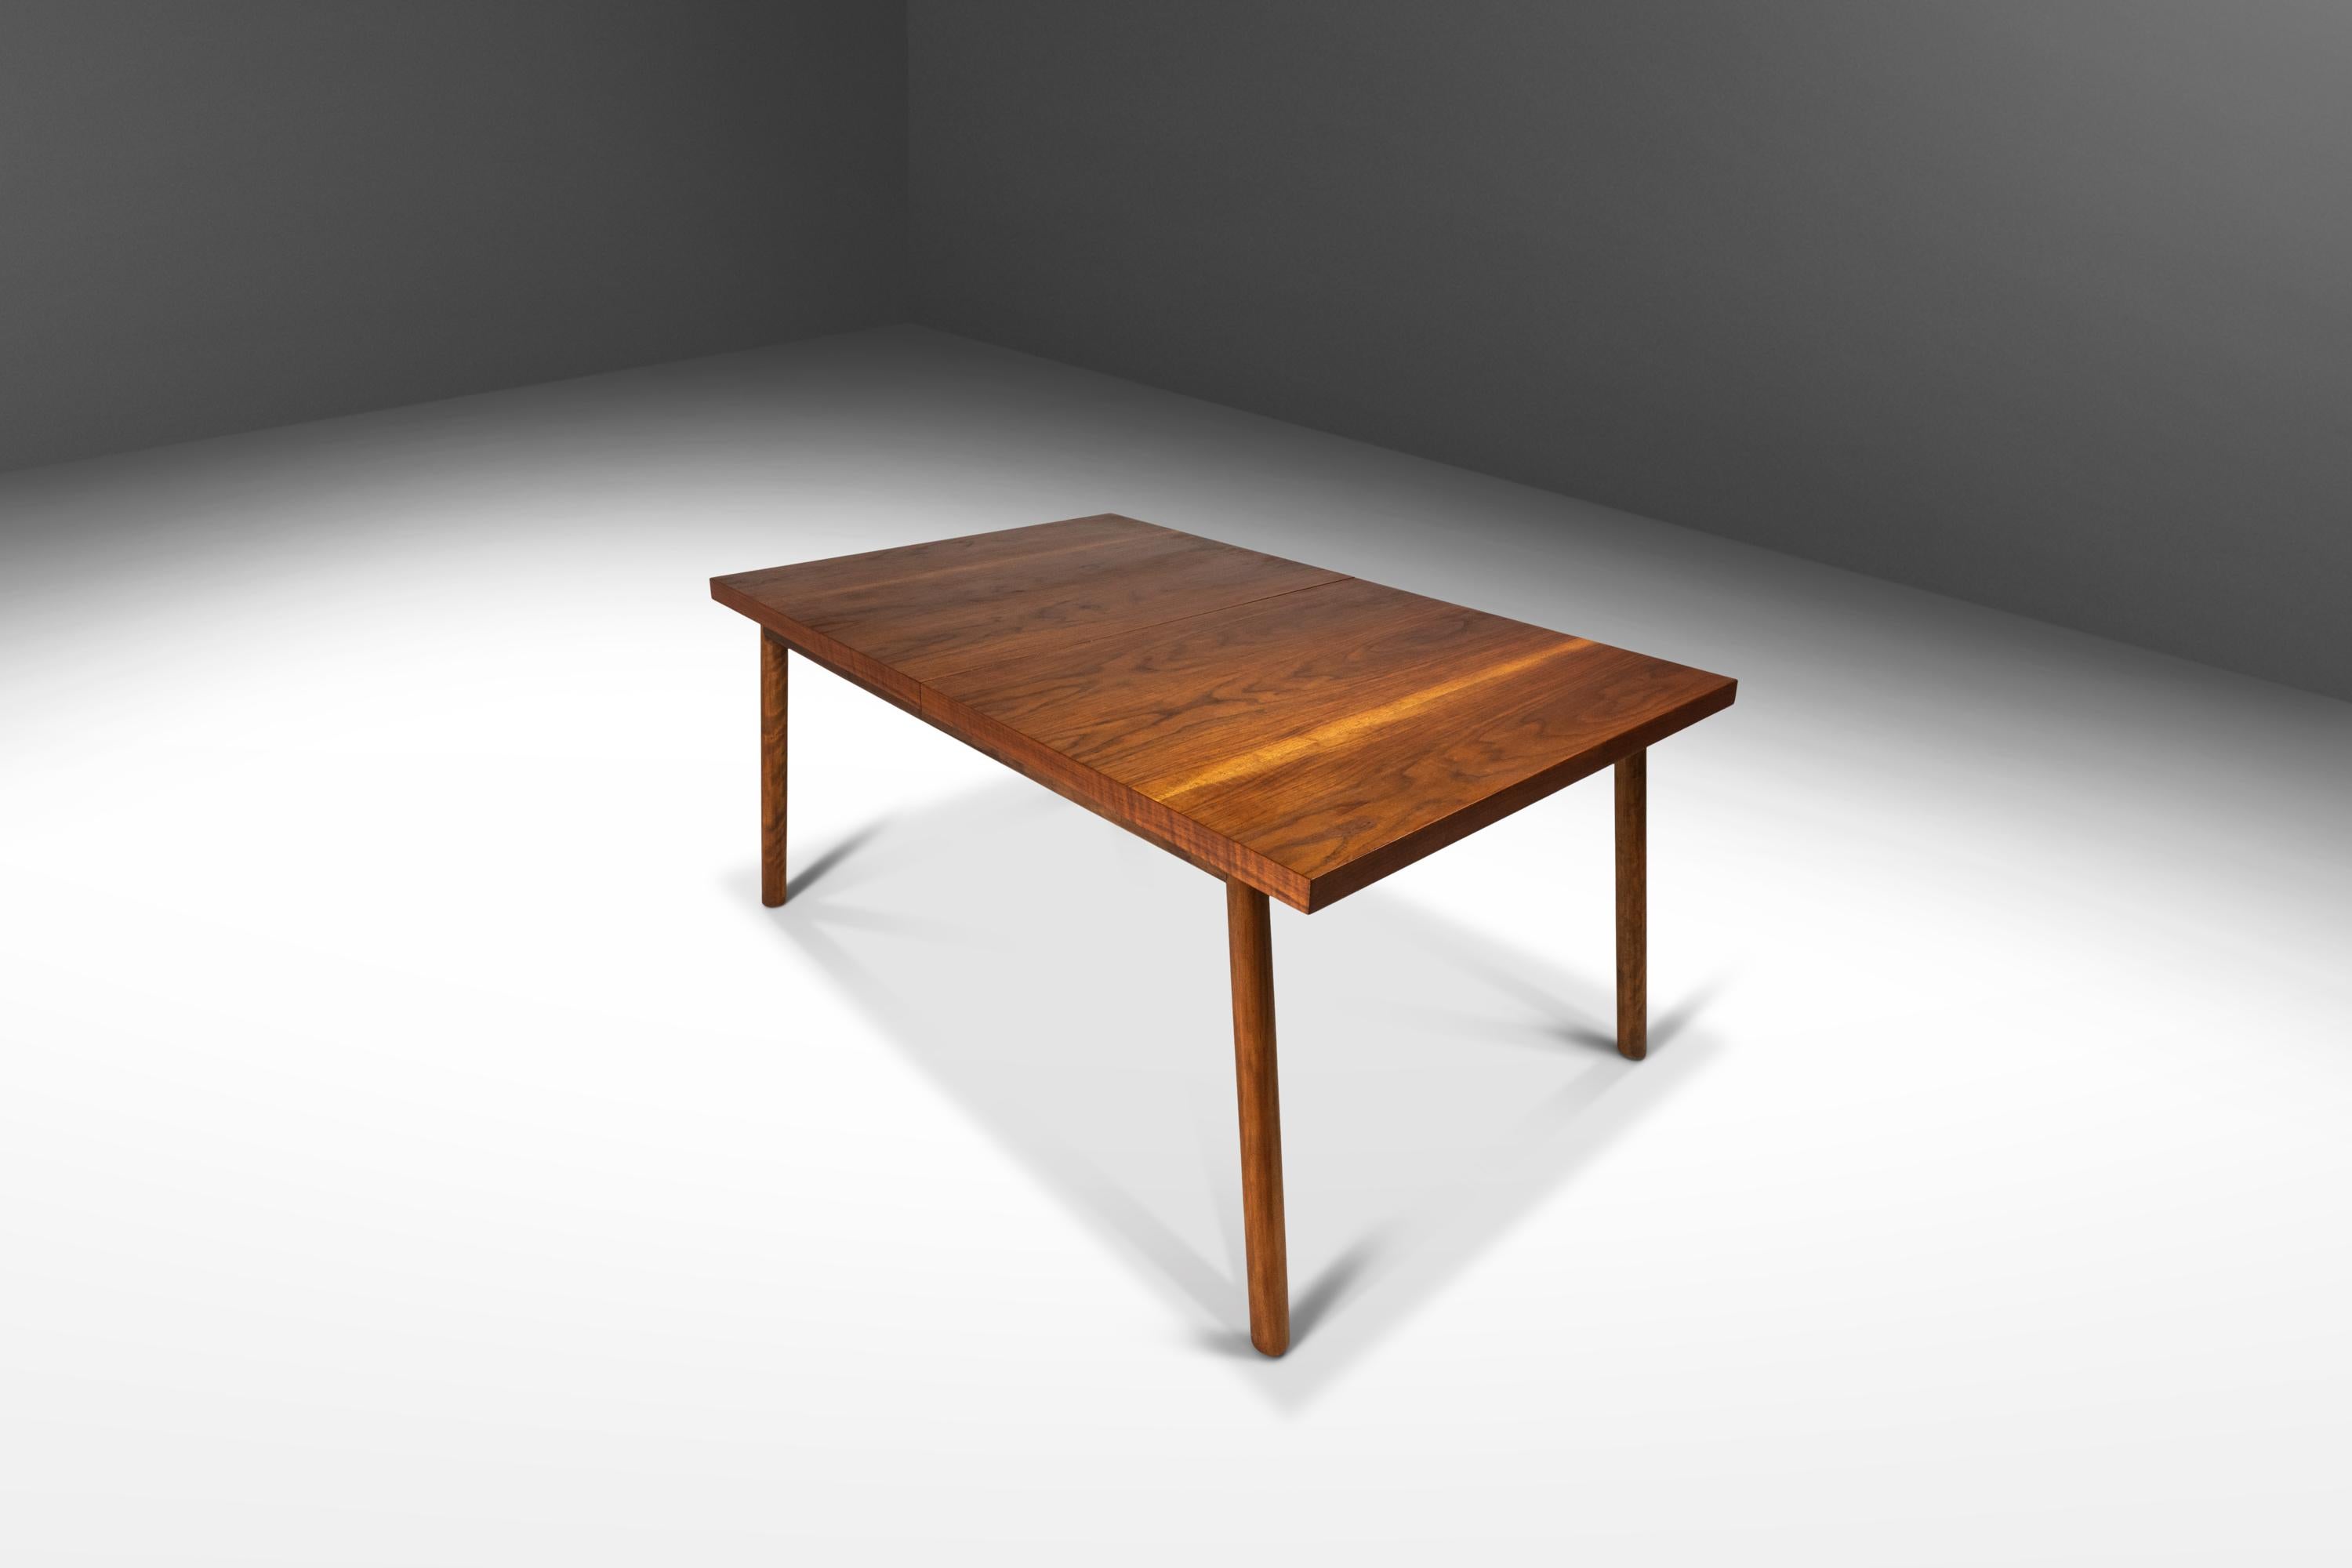 Introducing a rare expansion dining table in walnut by T.H. Robsjohn-Gibbings for Widdicomb, crafted in the 1950s in Grand Rapids, Michigan. This impressive table, in stunning original condition, is constructed from a mix of solid and veneered